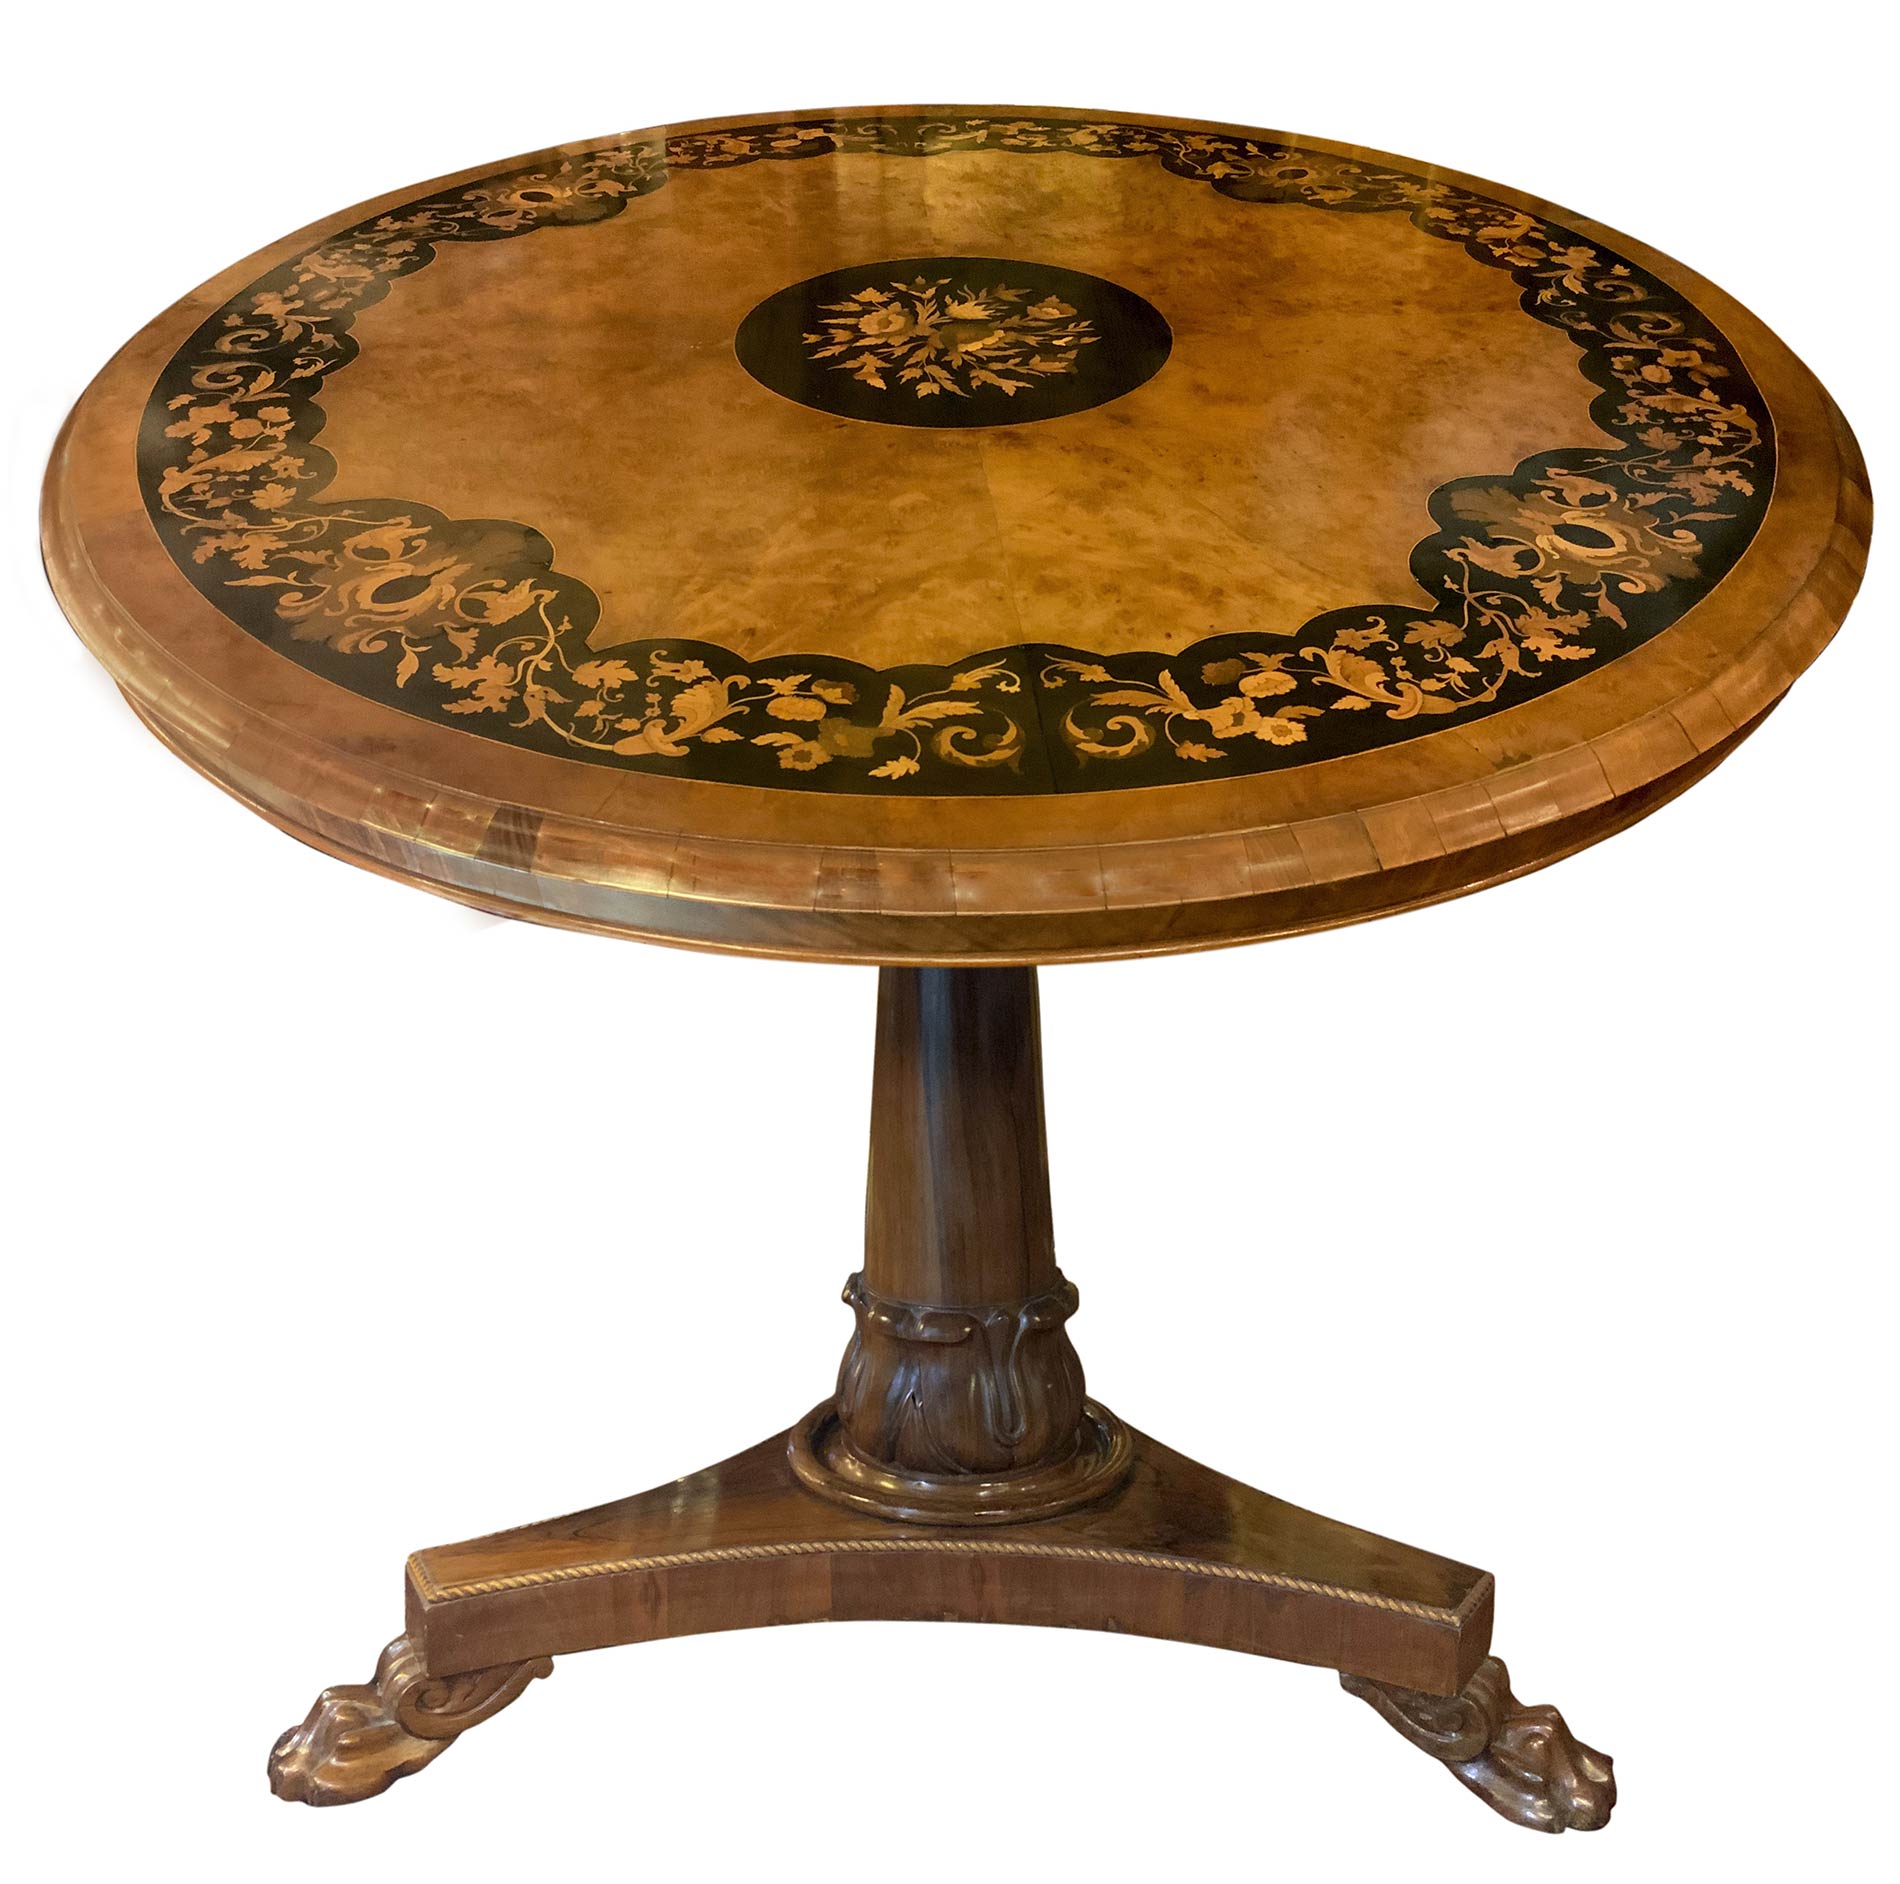 Round table inlaid on the floor with light woods. H 75 cm diameter cm 132. Central Foot lion.